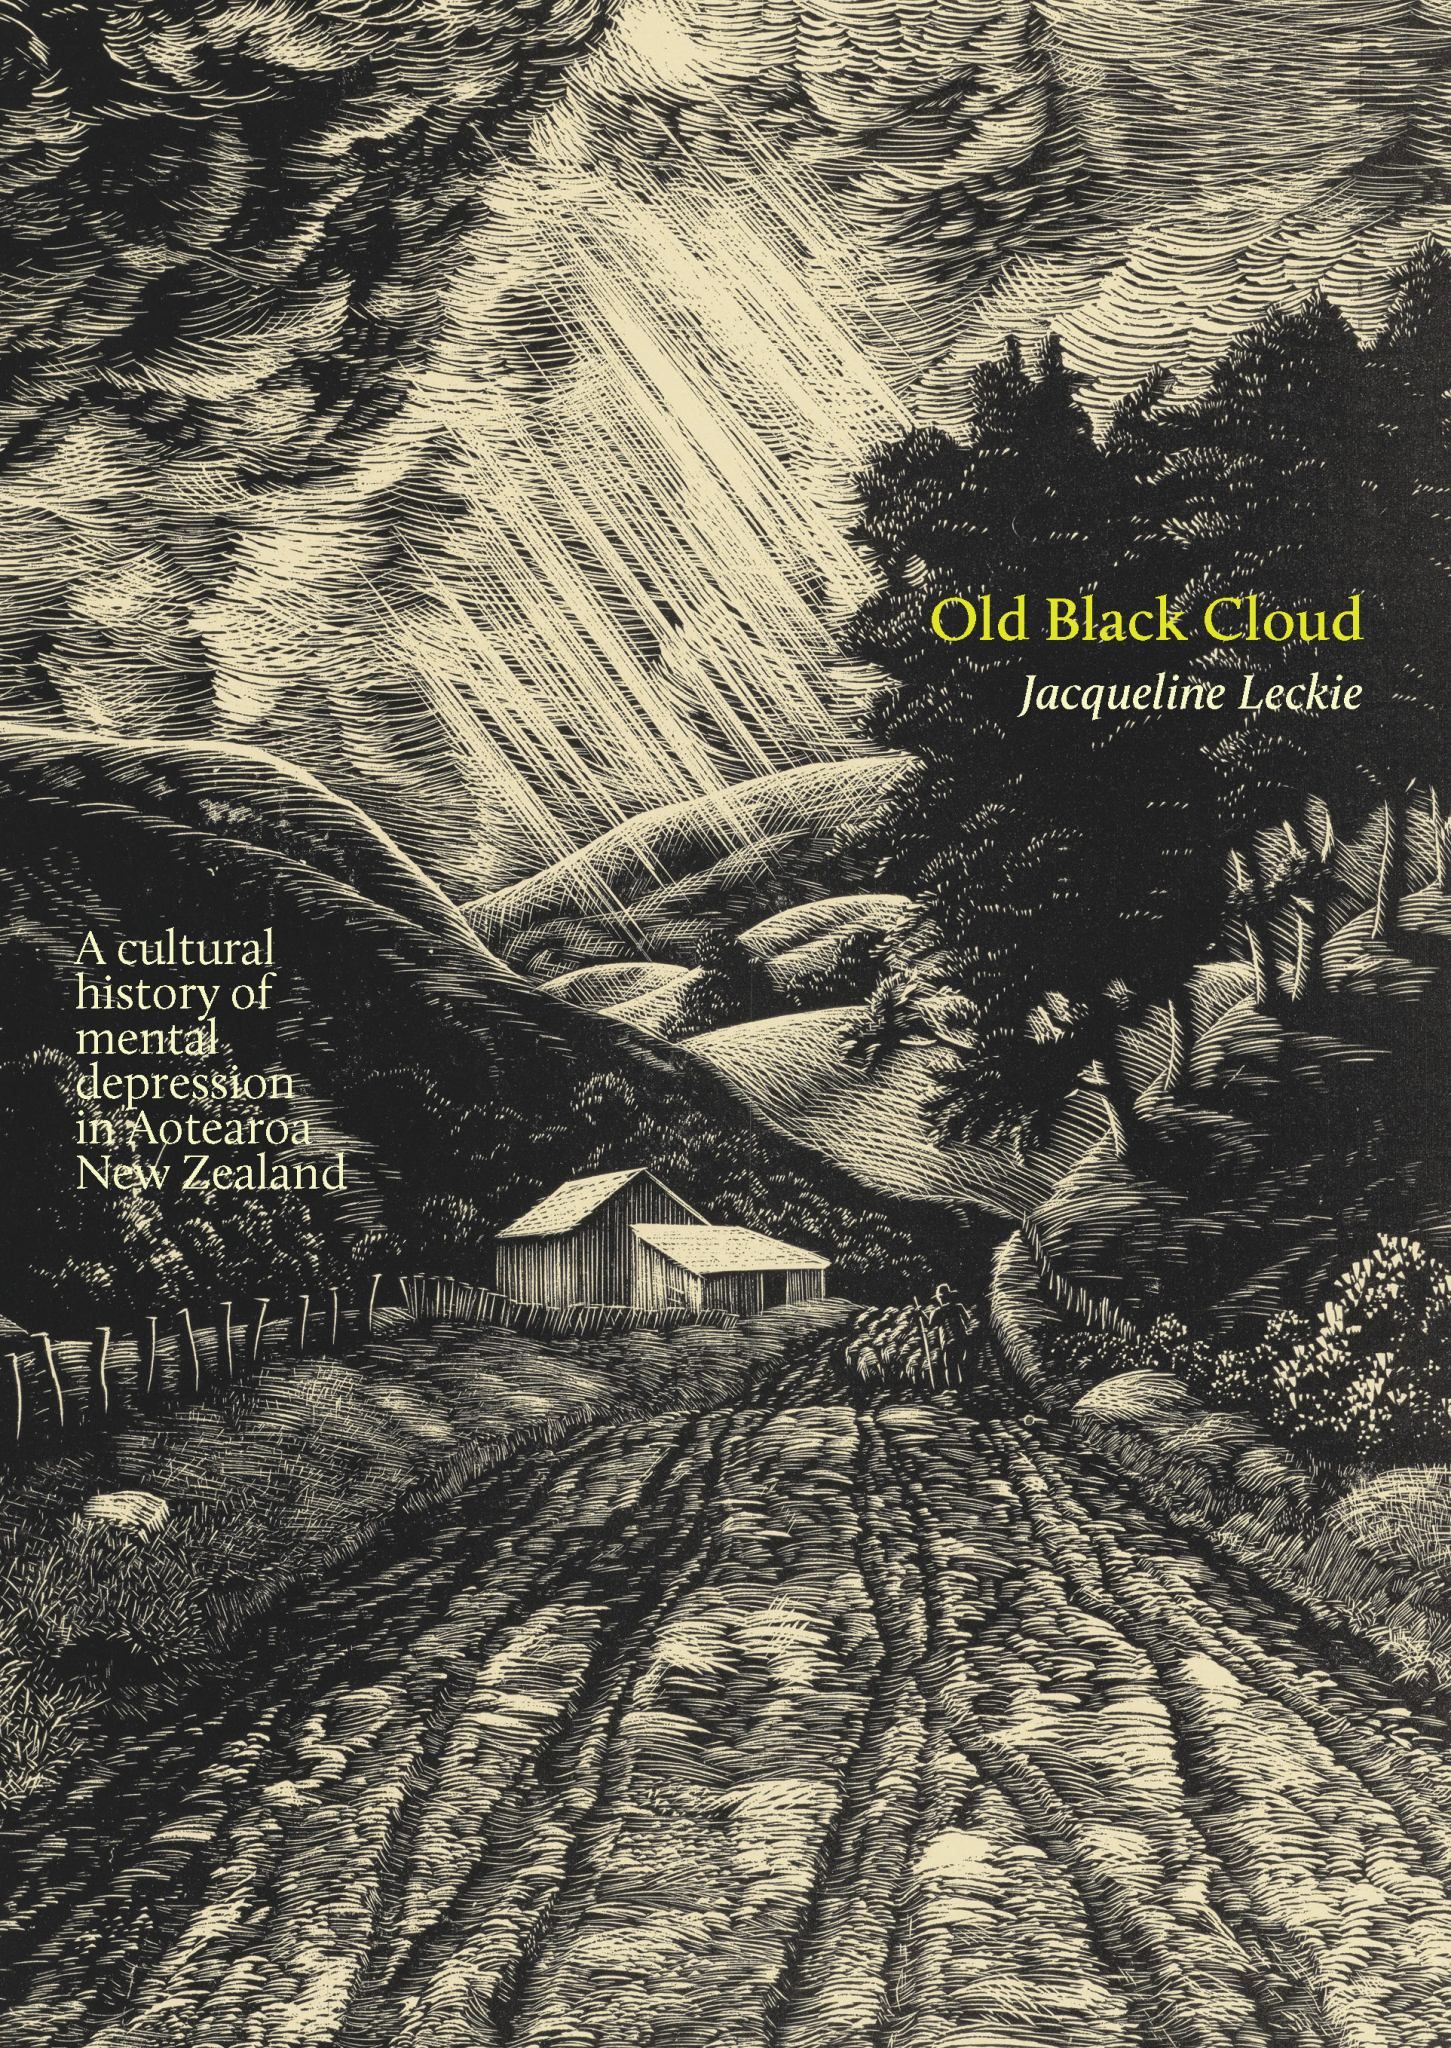 Book Launch: Old Black Cloud by Jacqueline Leckie